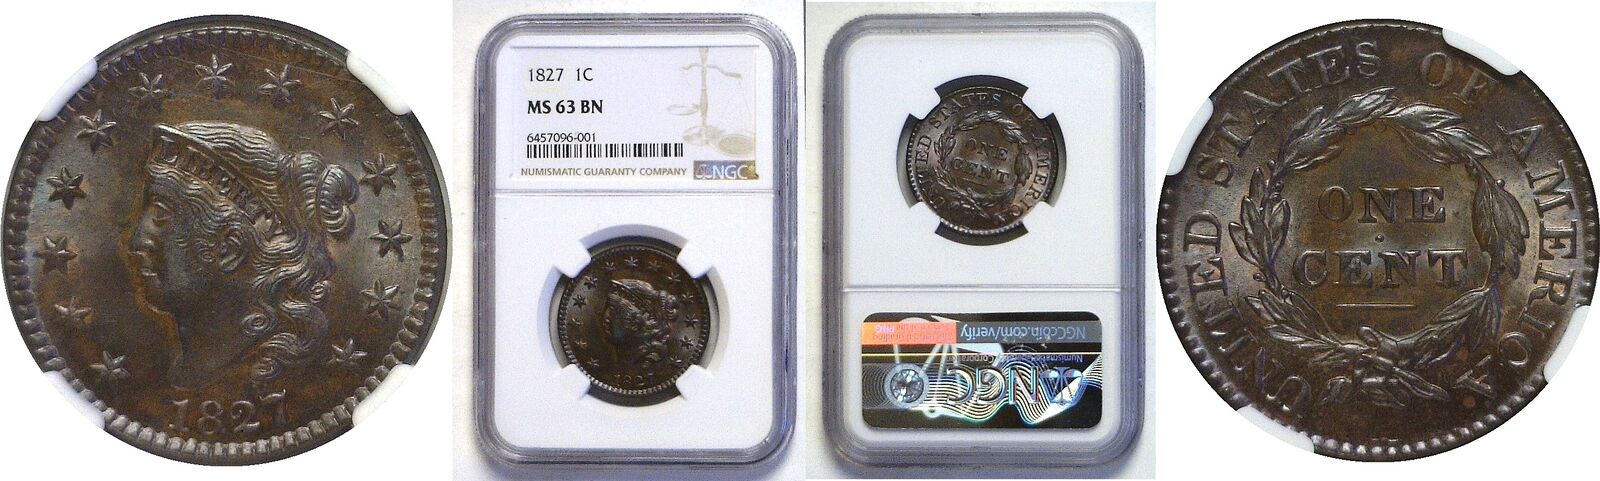 1827 Large Cent Ngc Ms-63 Bn